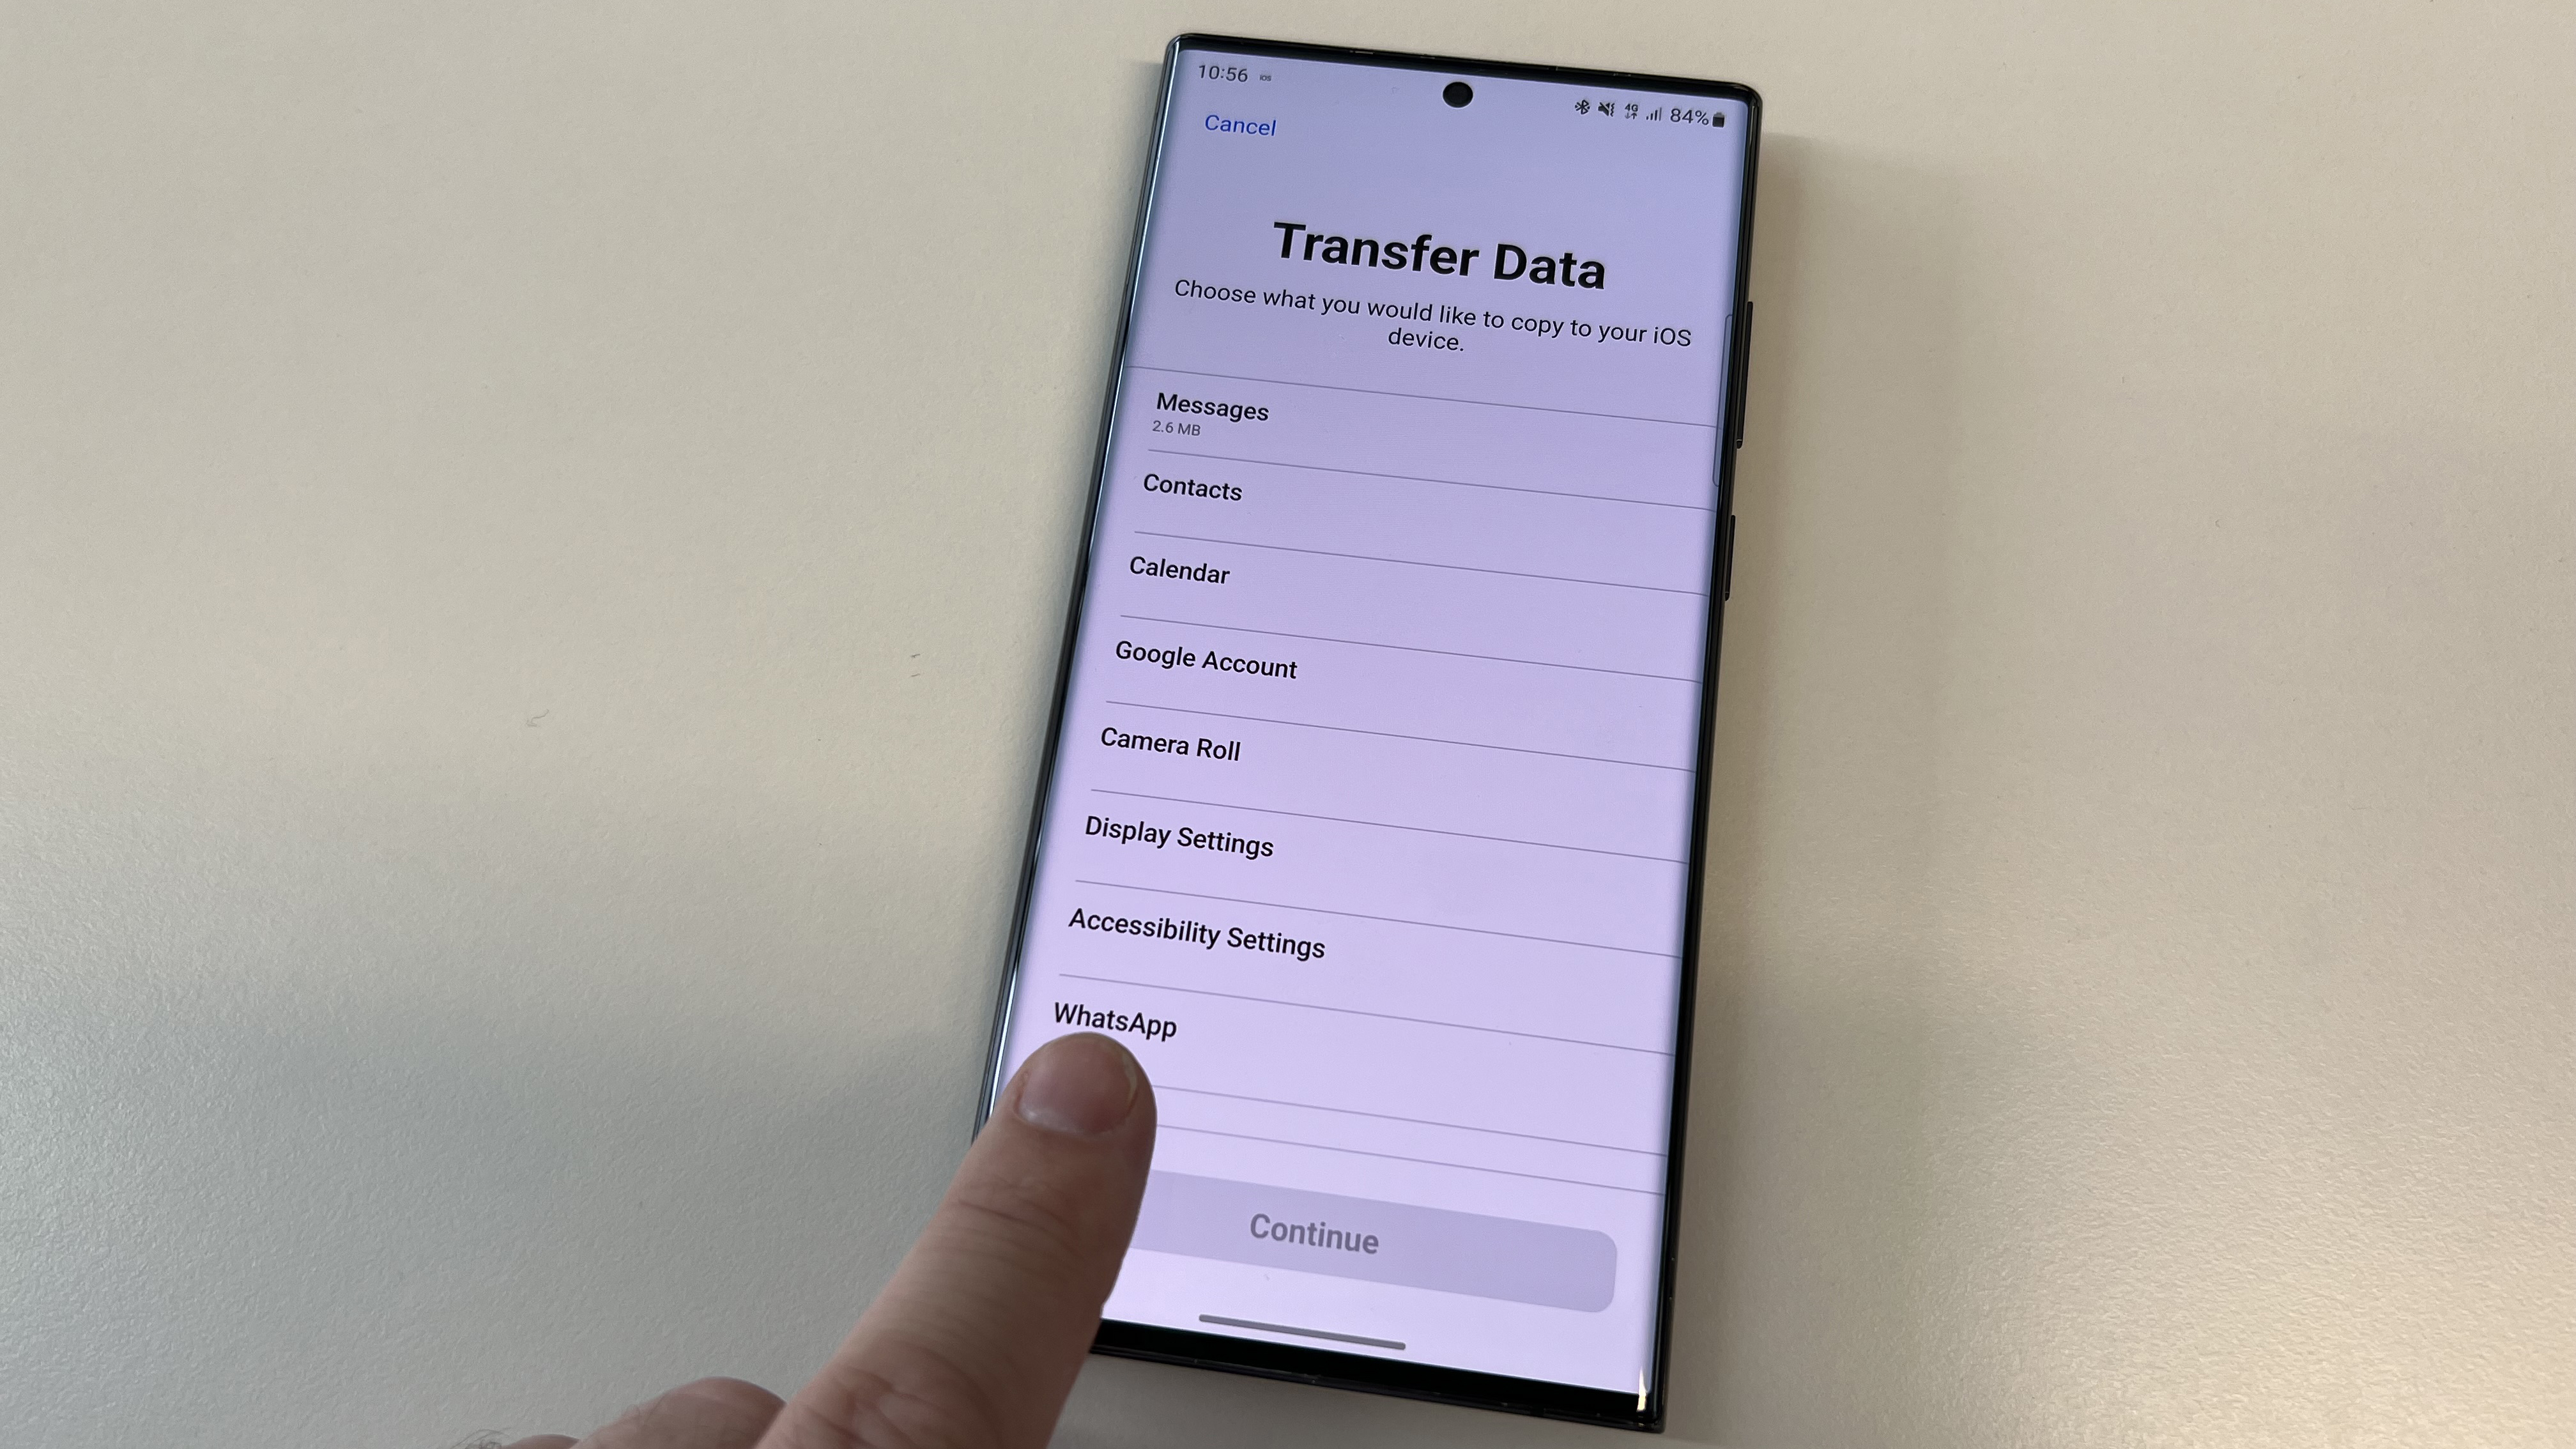 The data transfer screen of the Move to iOS app, with a finger pointing at the WhatsApp section